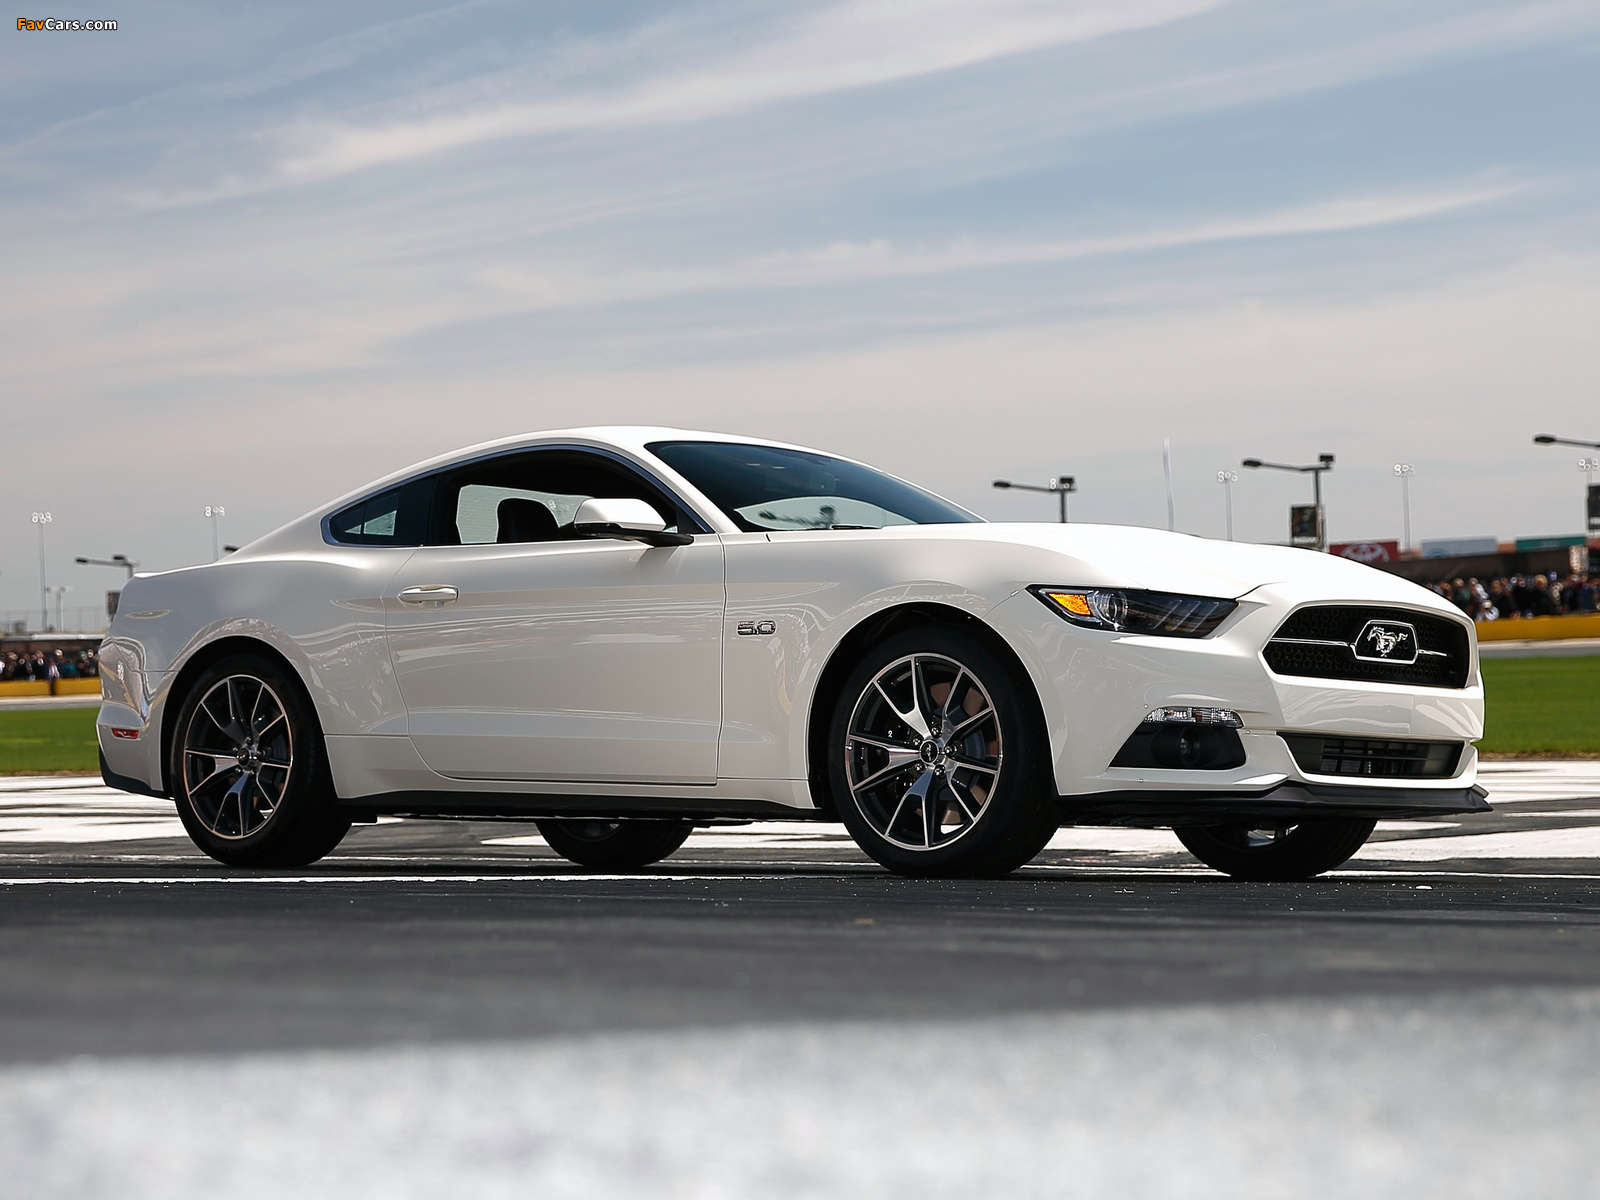 Used 2015 Ford Mustang Coupe Pricing & Features | Edmunds